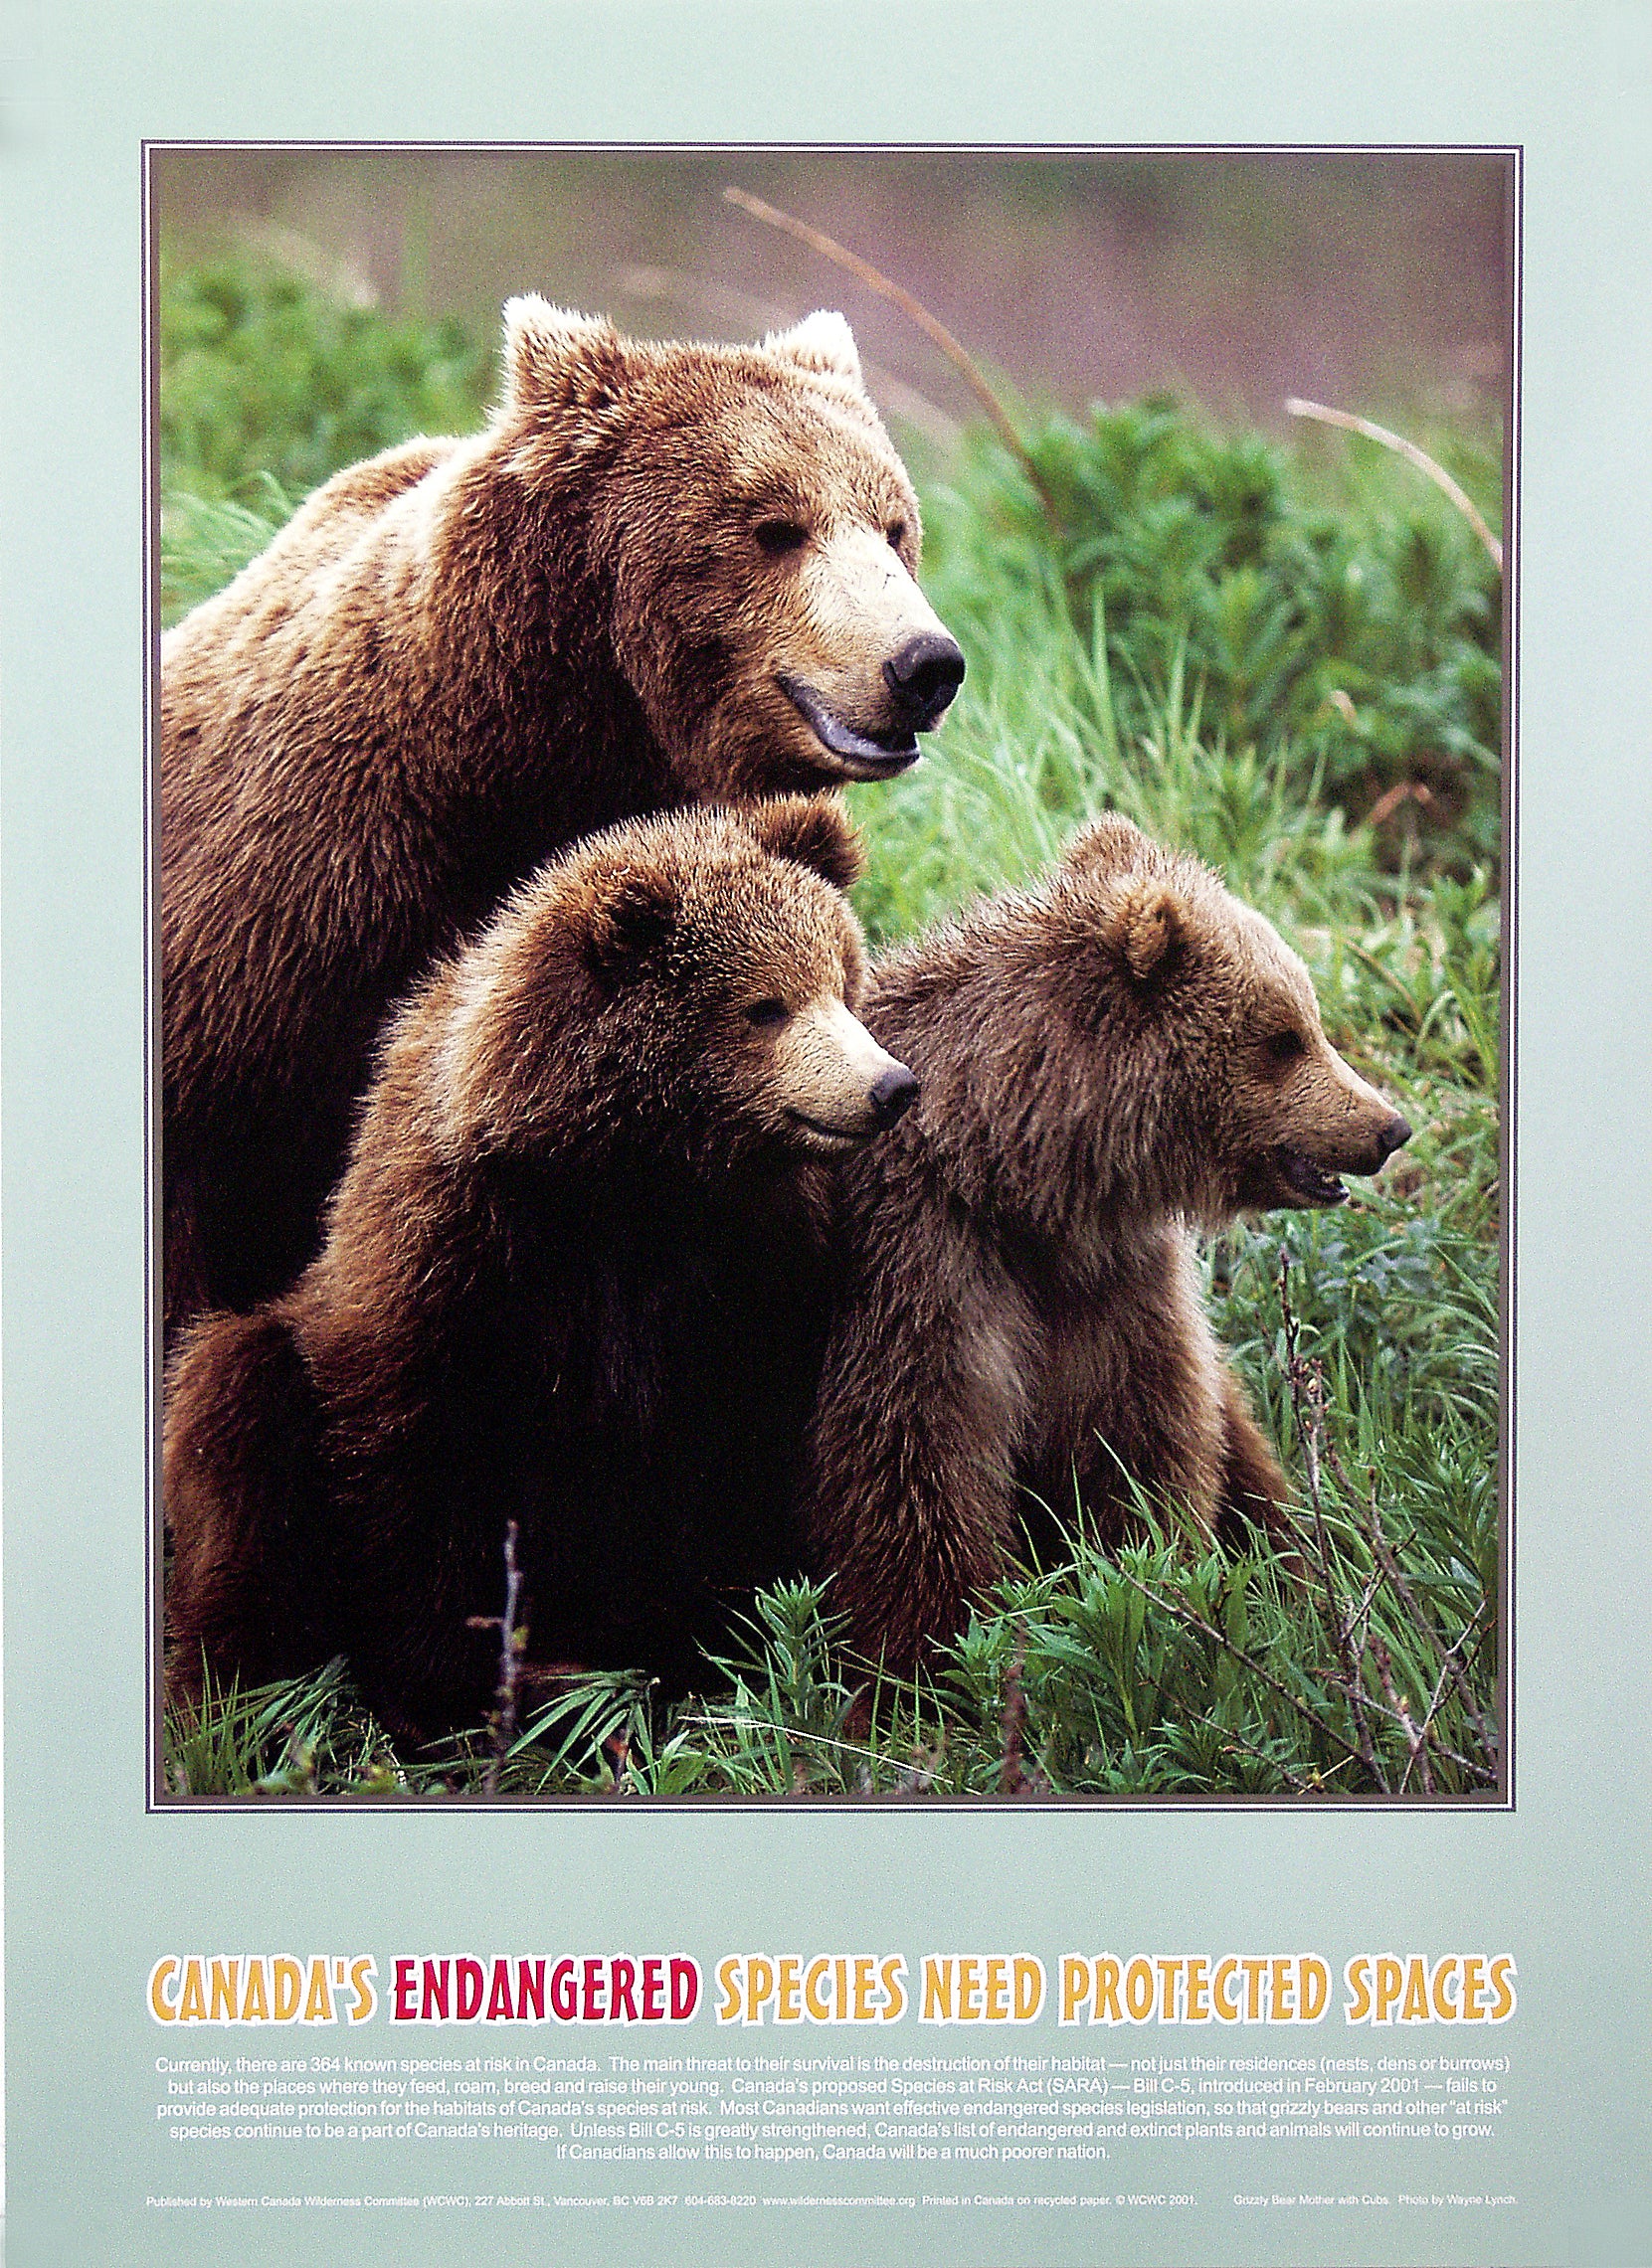 A poster with a photo of a grizzly bear family - one mom and two kids. Text on the image says "Canada's Endangered Species Need Protected Spaces." End of image descriptipn.